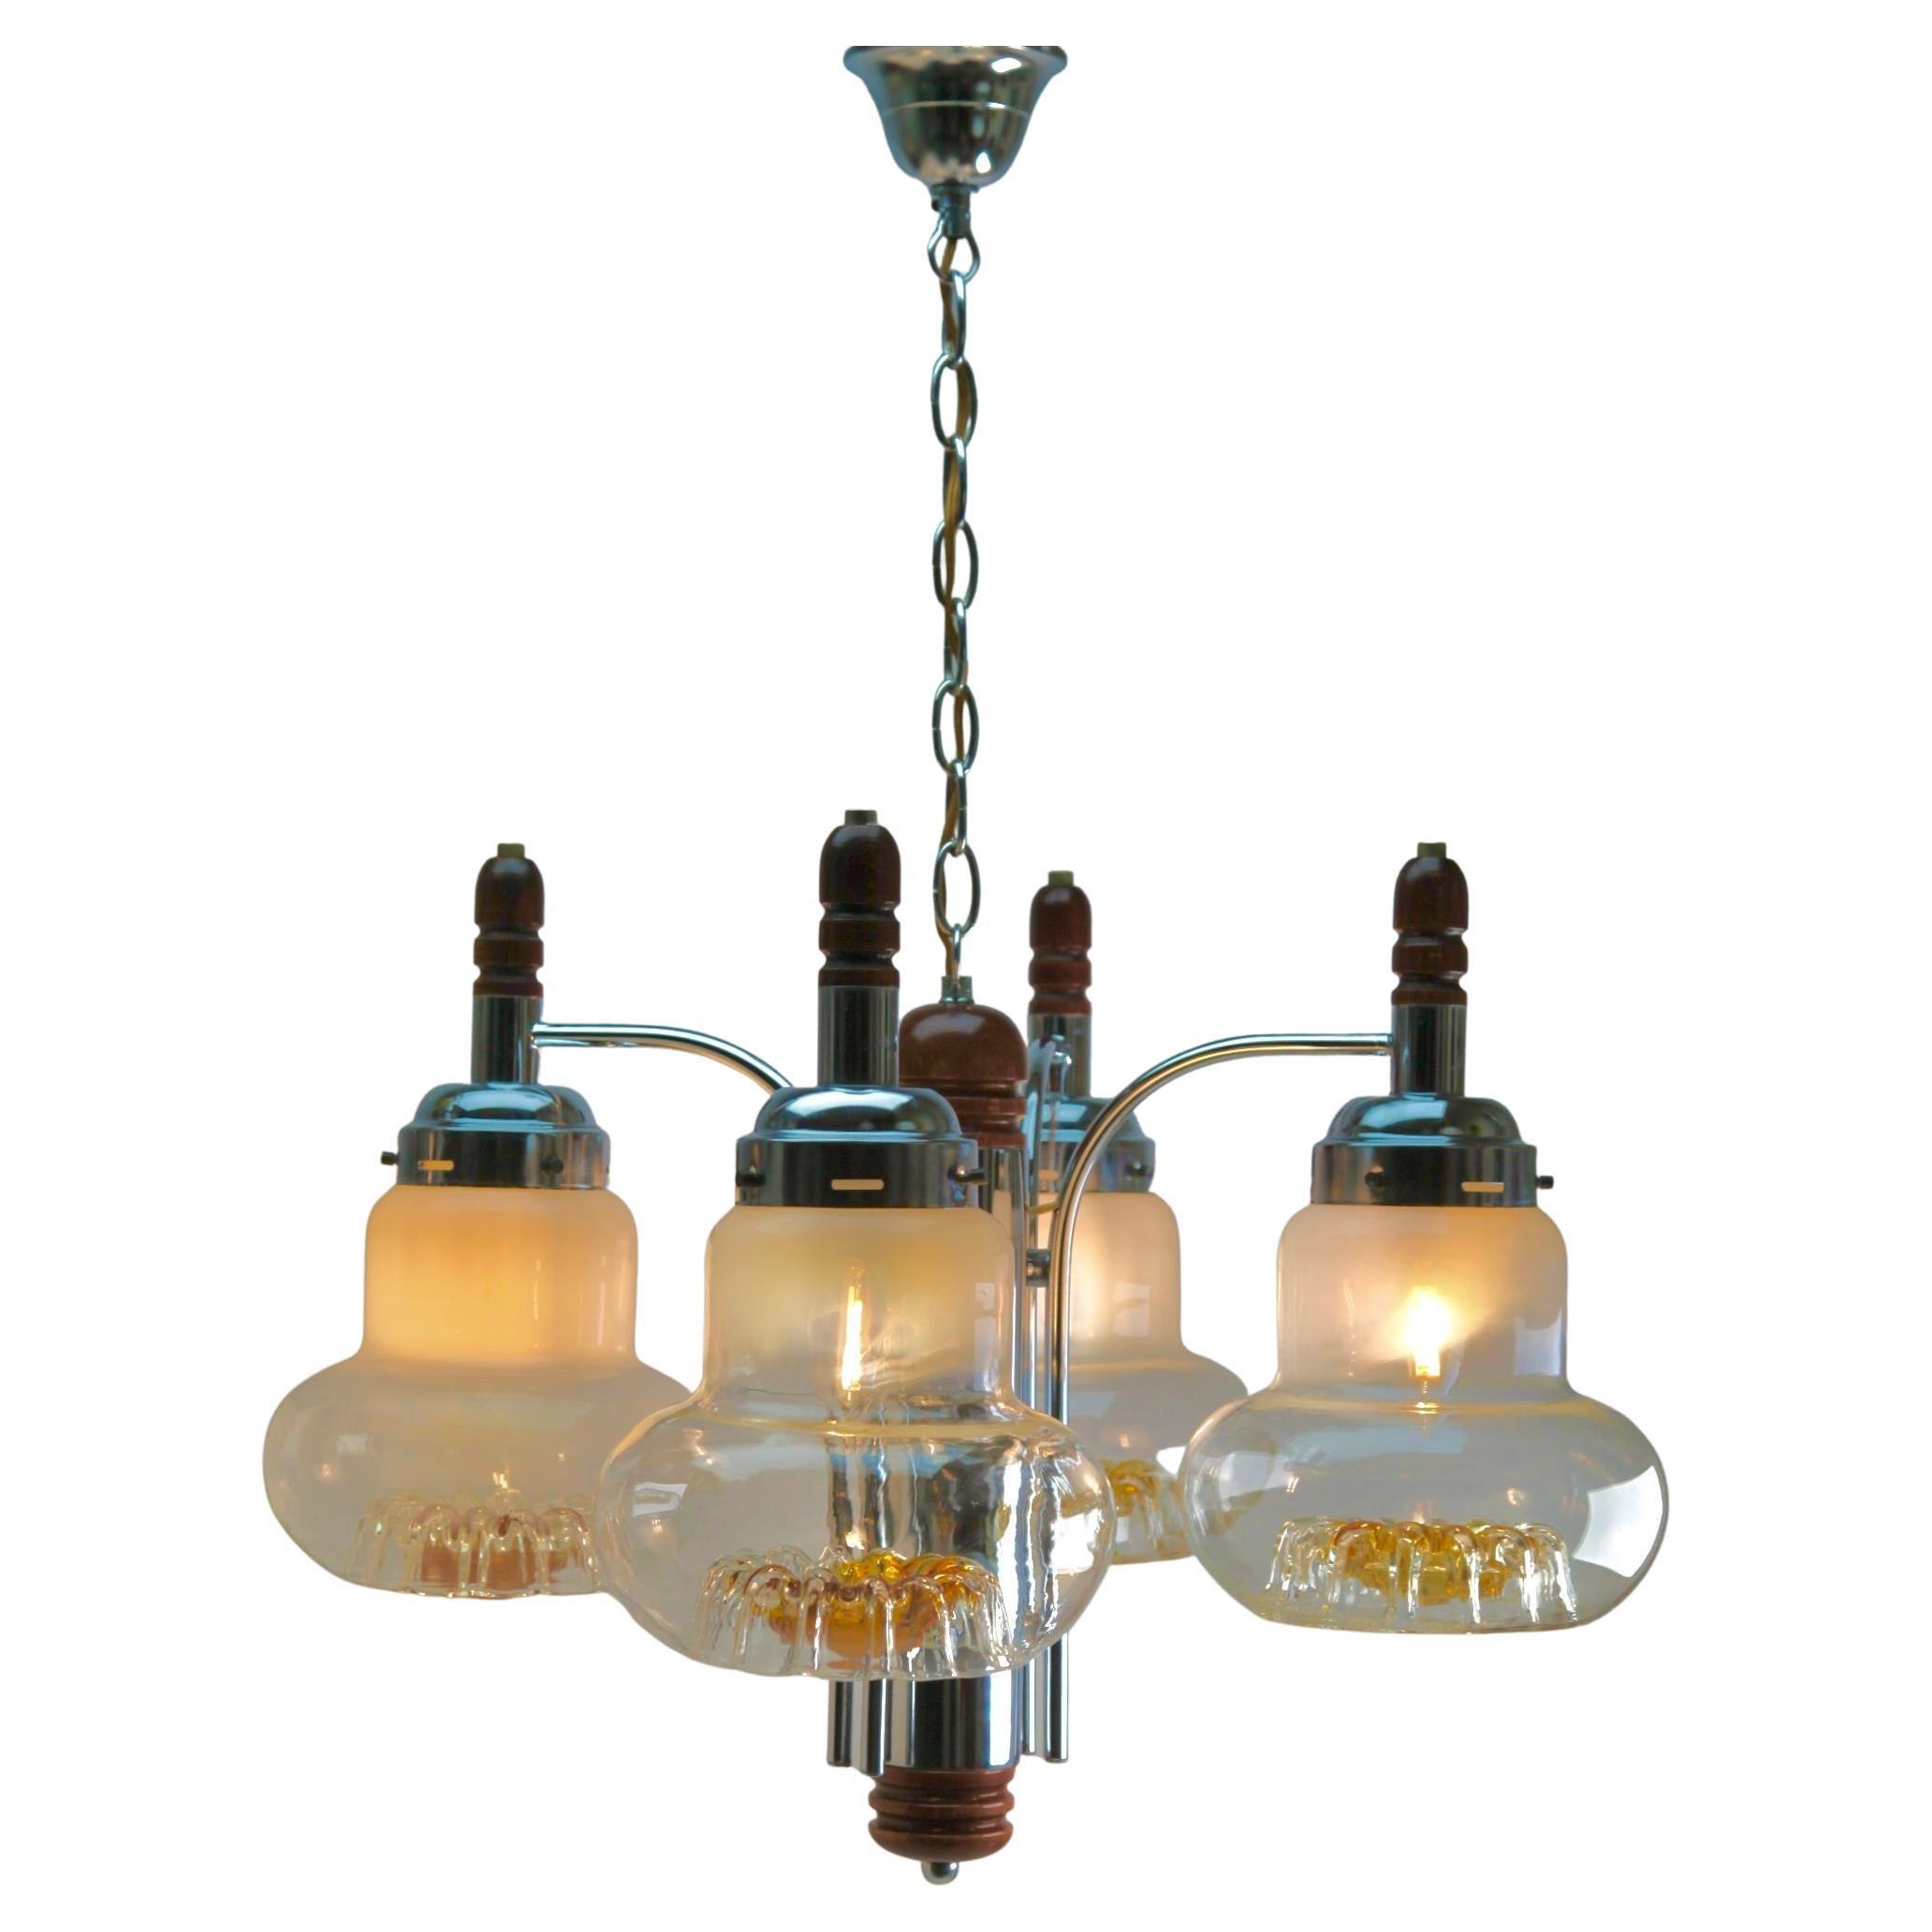 Pendant by Mazzega with 4 Globes of Clear Glass with Orange Inclusions For Sale